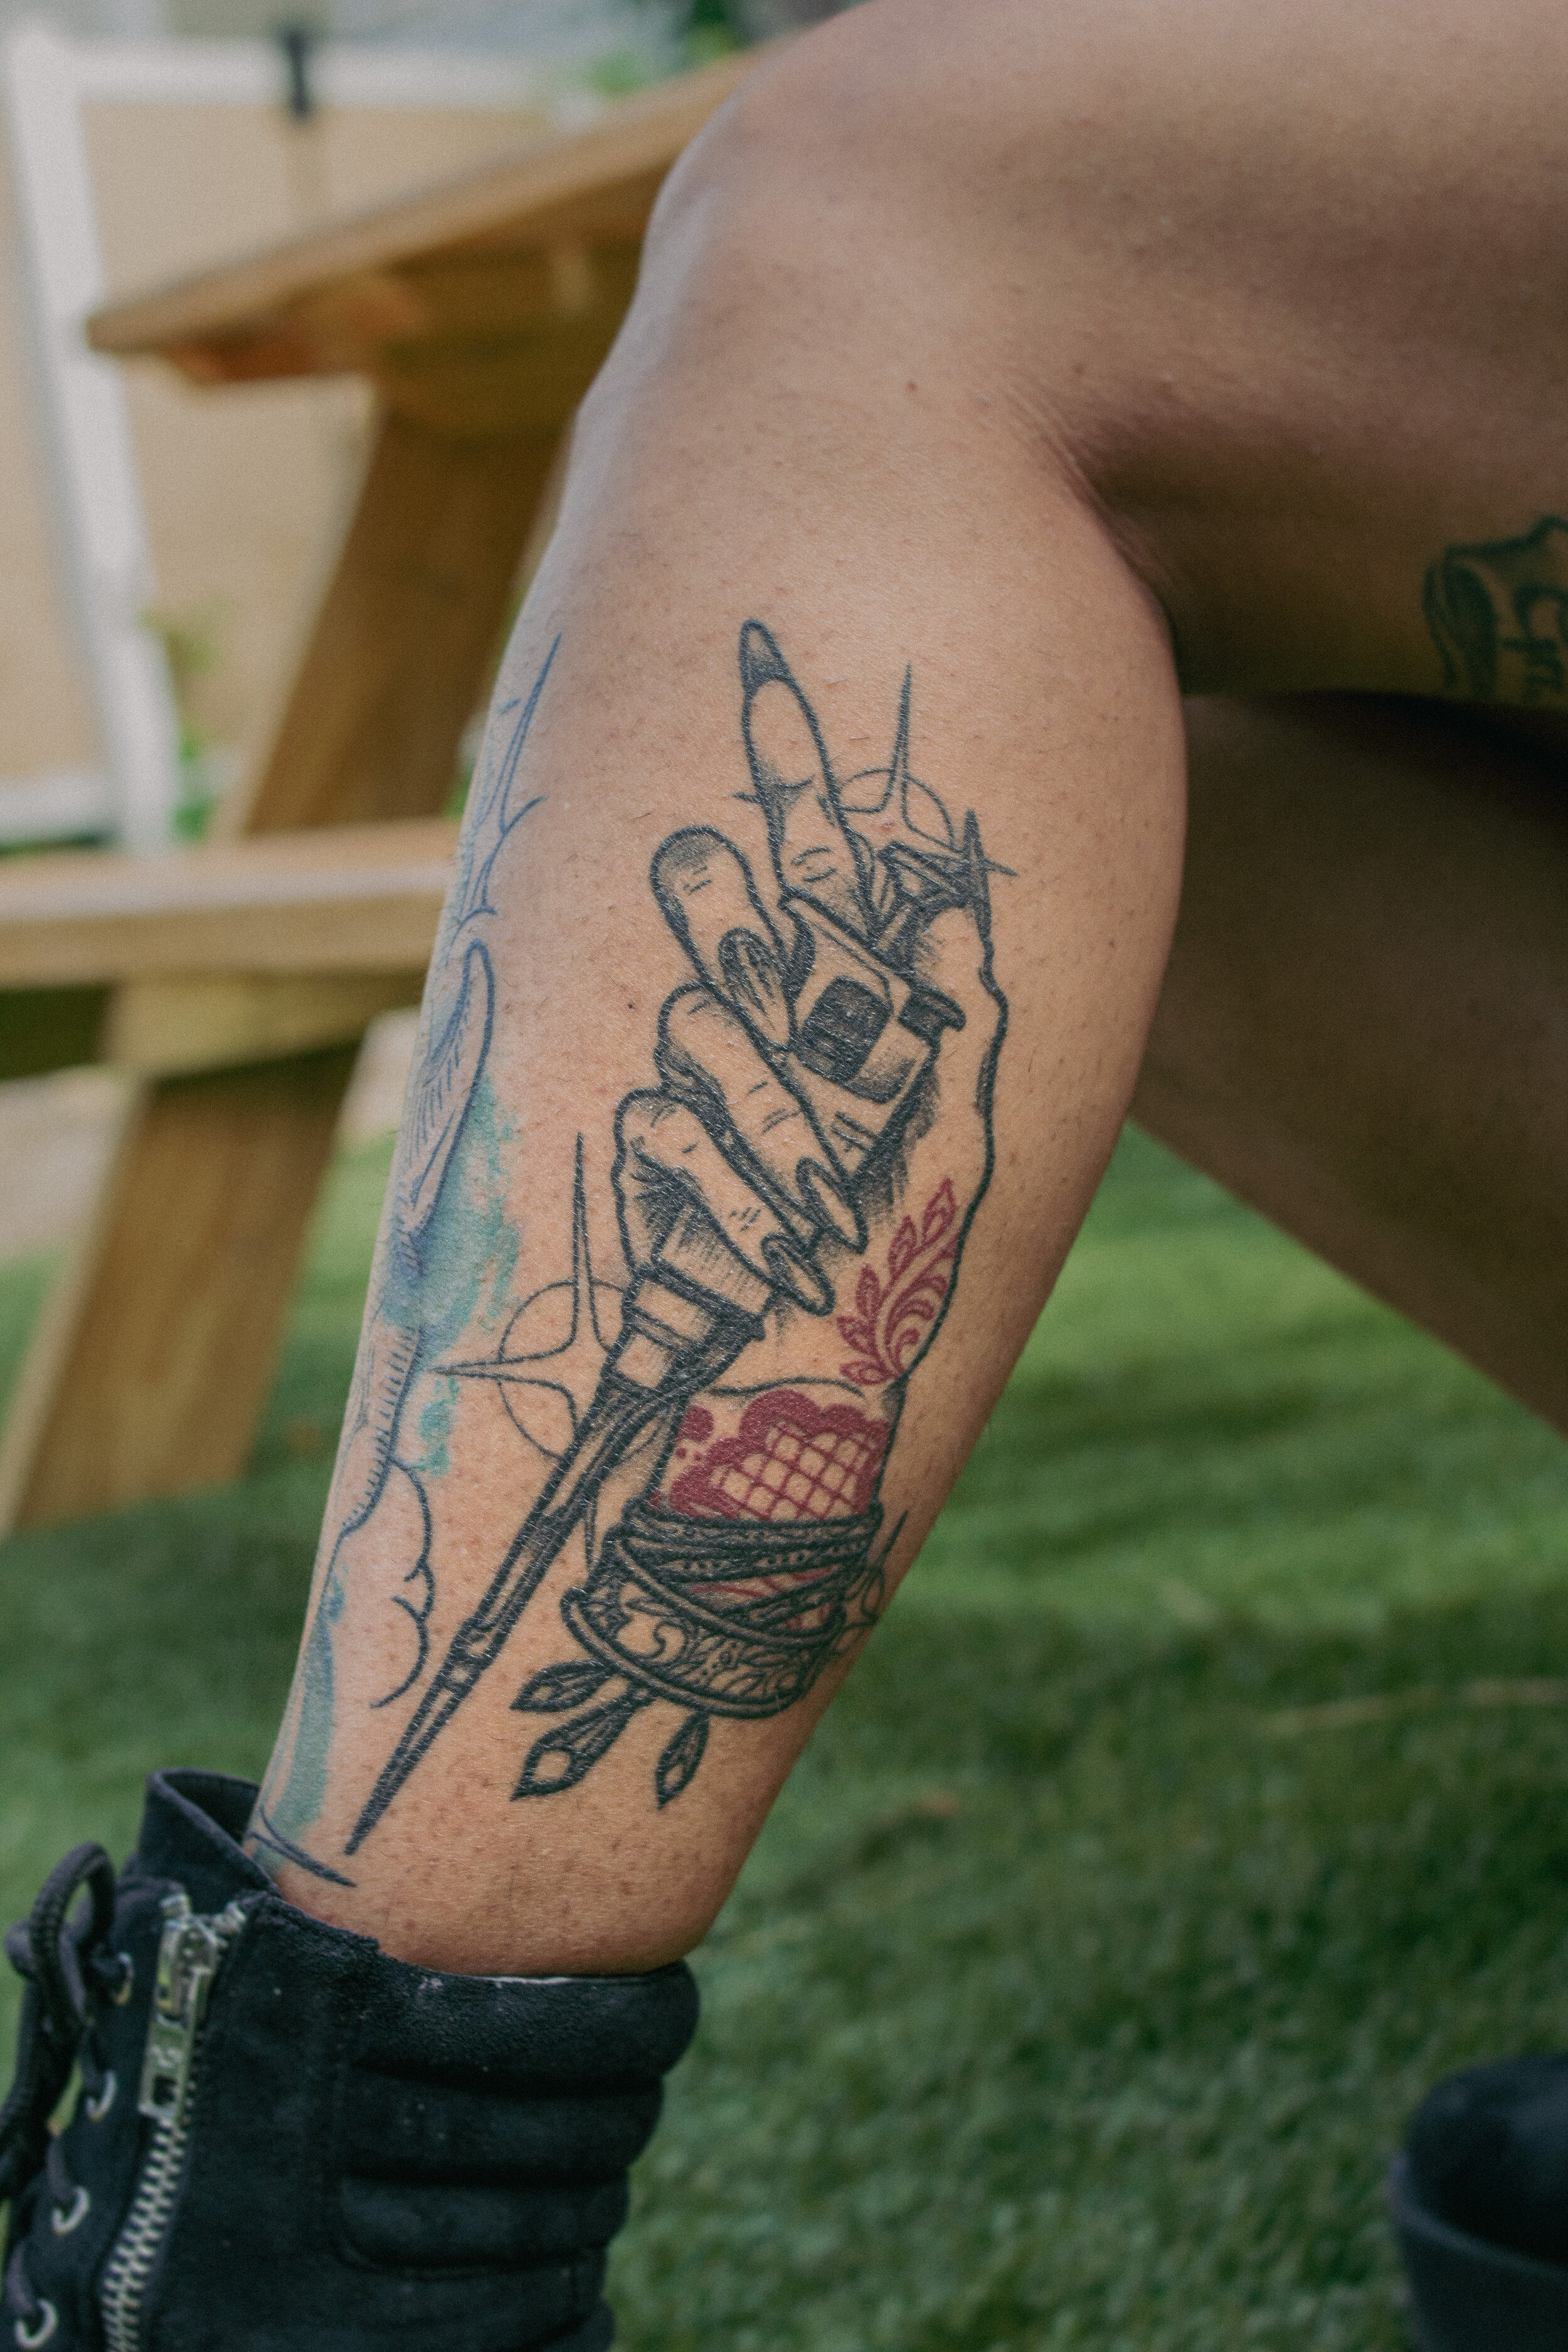 54 Stunning Elbow Tattoos With Meaning - Our Mindful Life